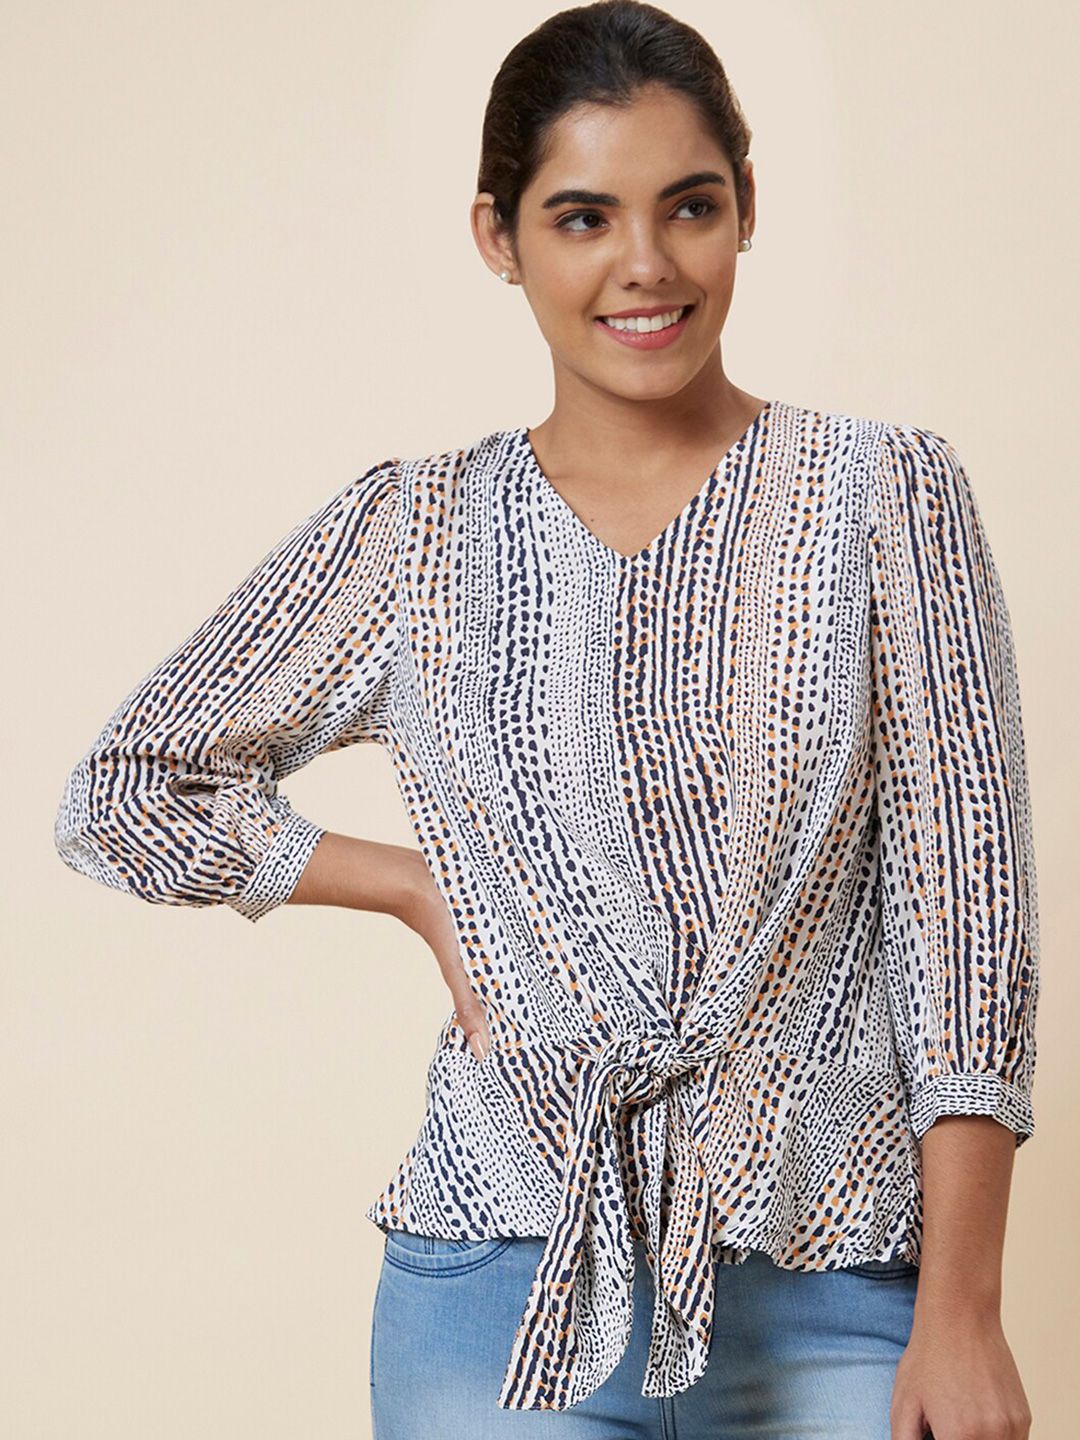 Globus White & Blue Abstract Printed Puff Sleeves Top Price in India